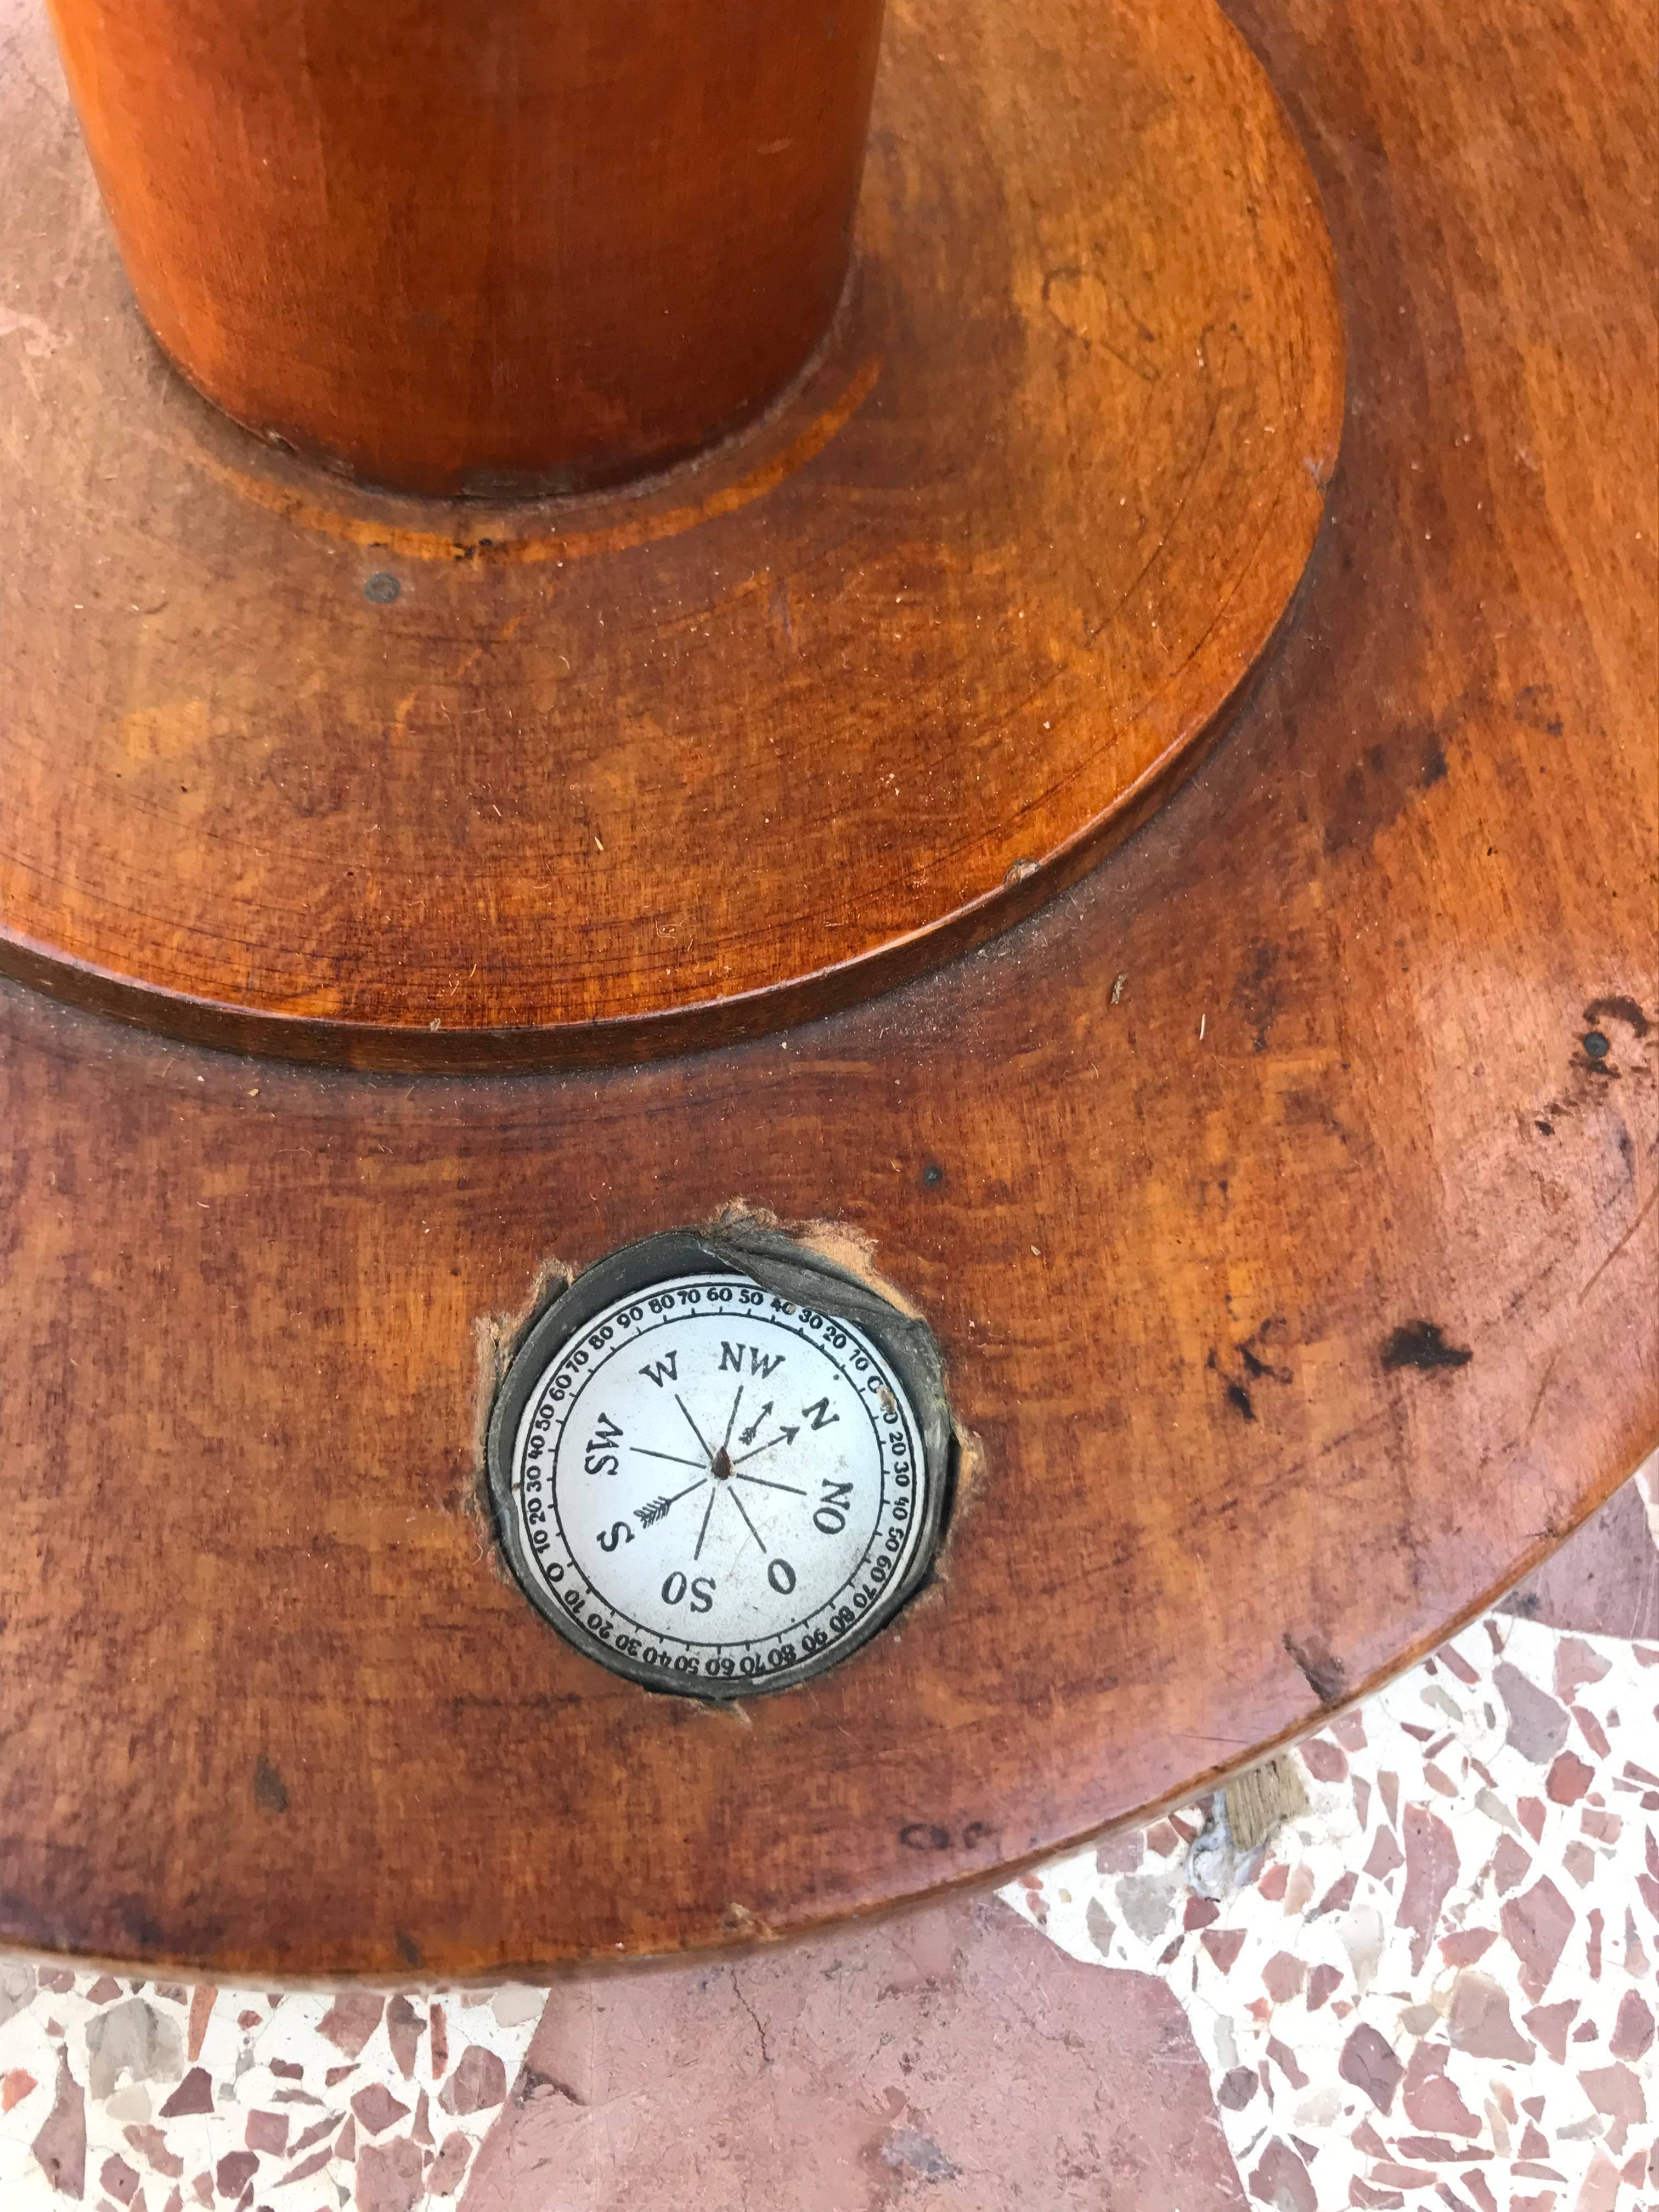 The wooden base has an embedded compass and supports the globe on a bronze stand.
      